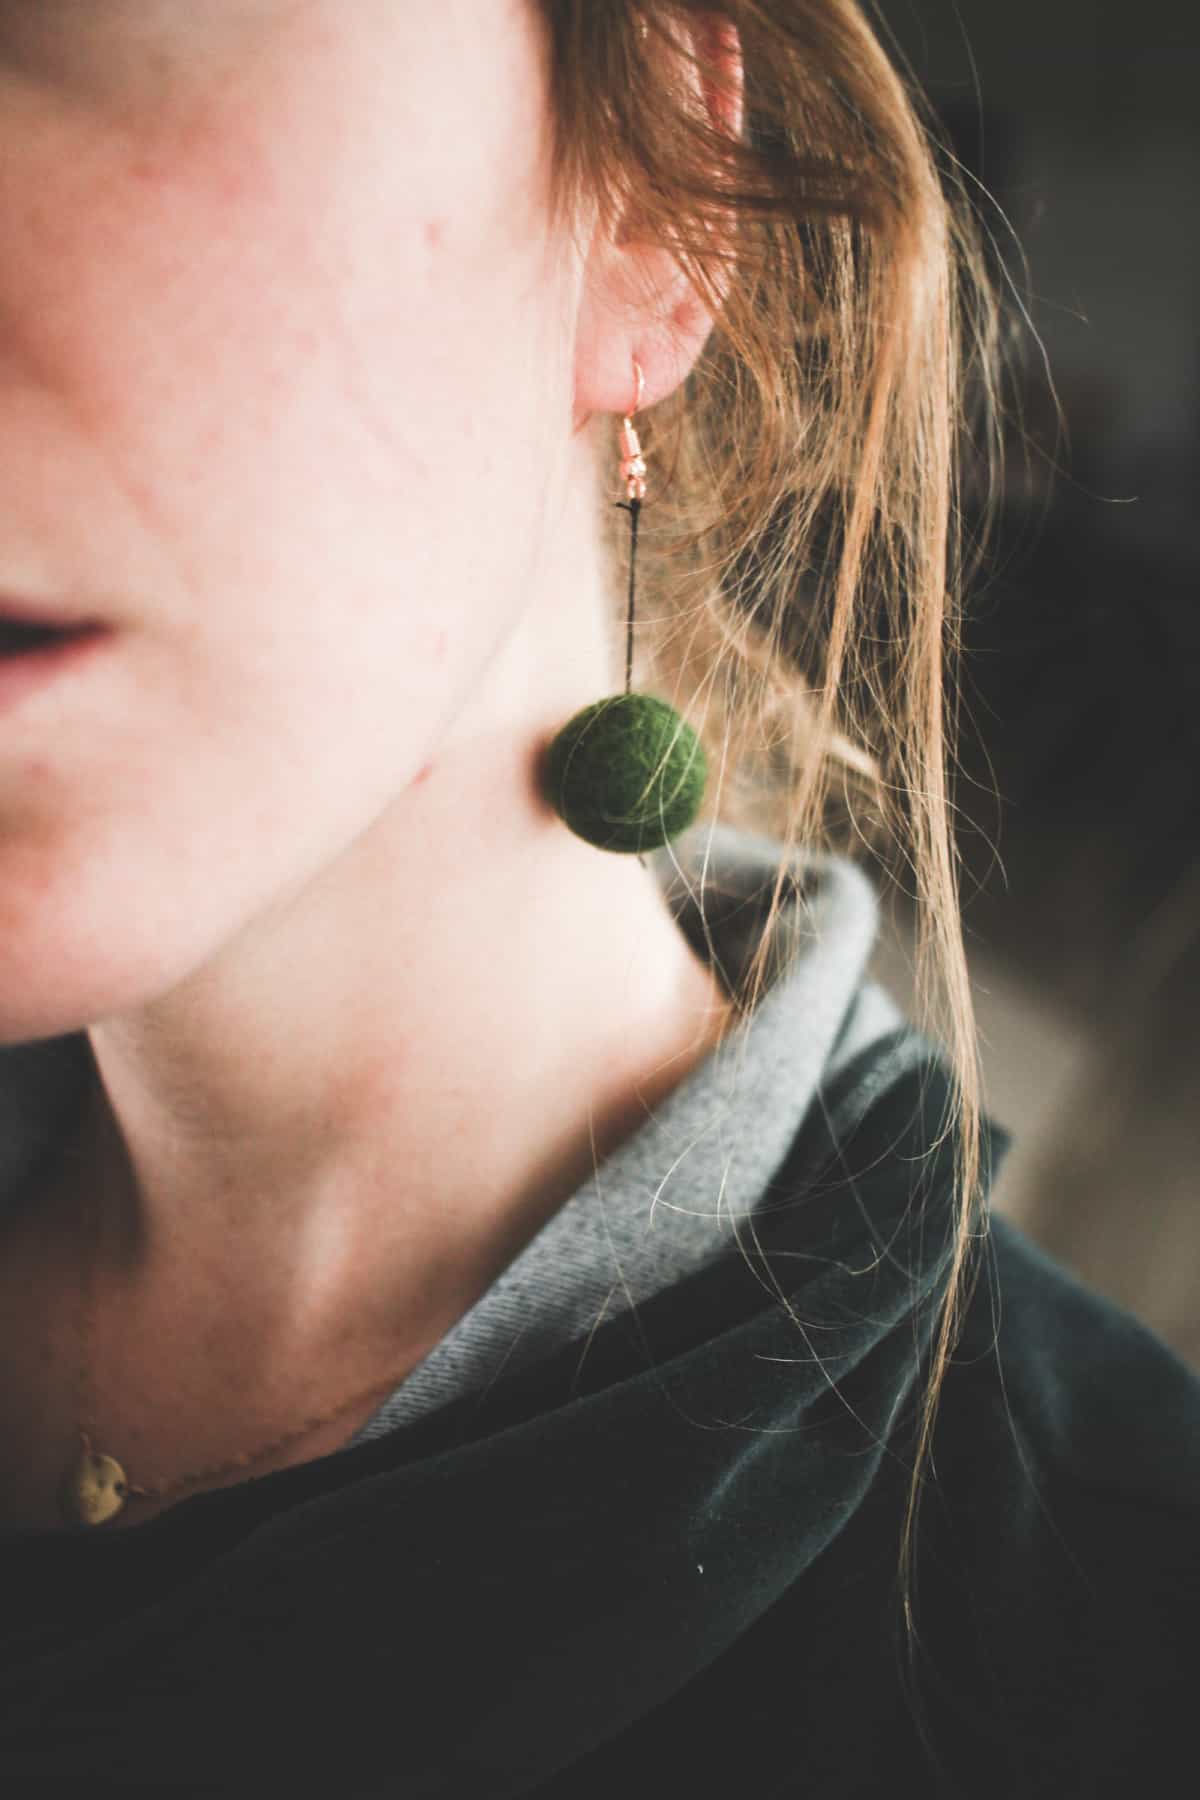 DIY felt ball earrings are so simple and quick. You can make them look exactly how you want, too!